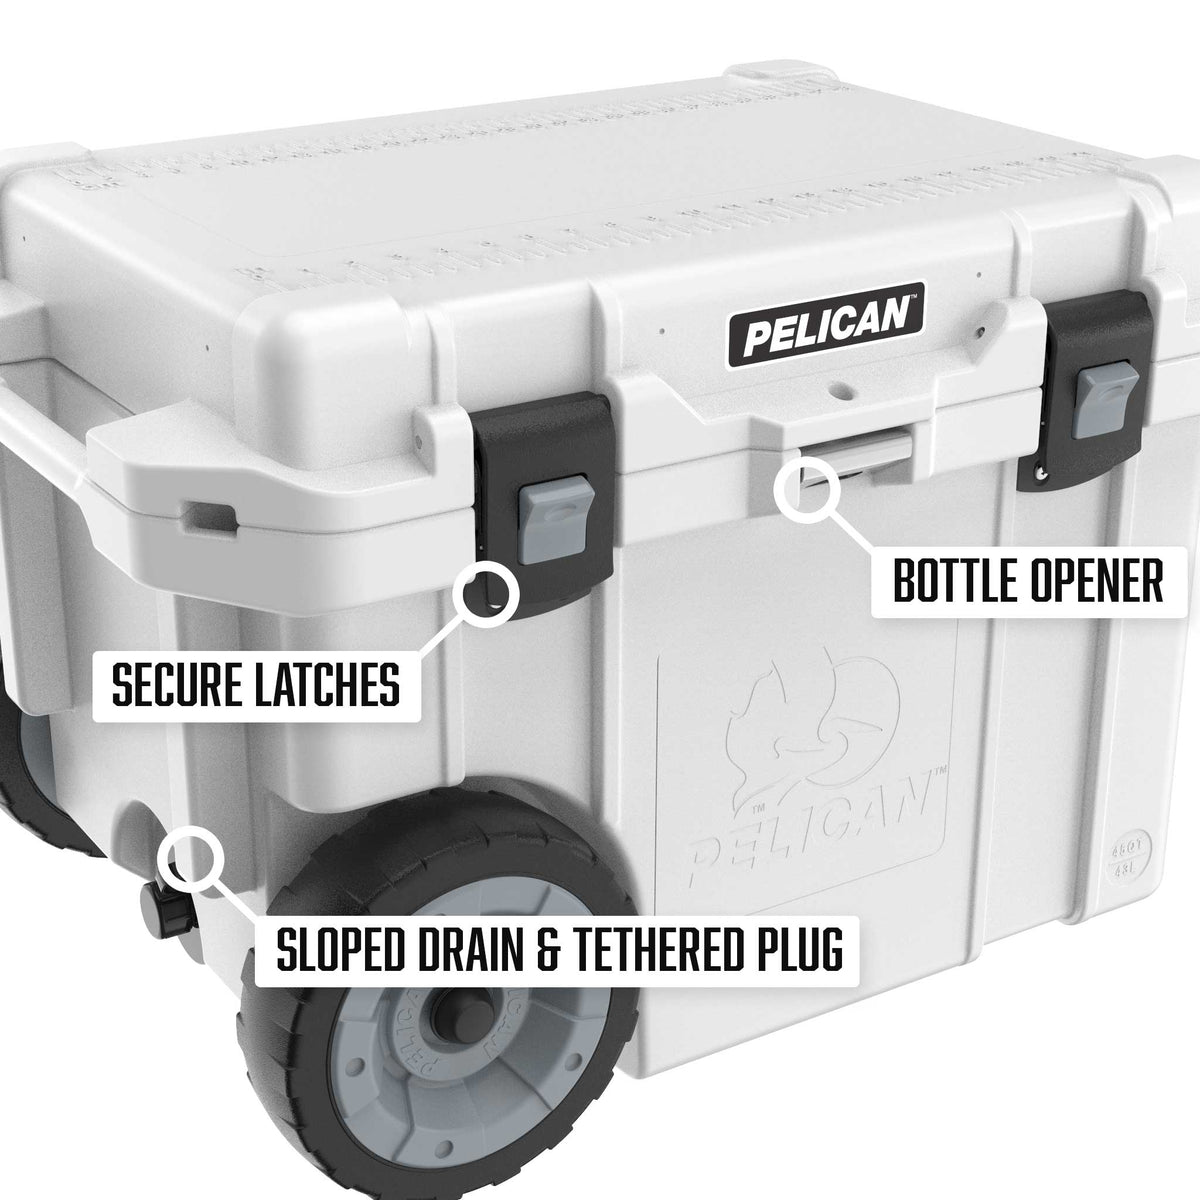 Pelican 45QT Elite Wheeled Cooler has secure latches, a sloped drain &amp; tethered plug, and a built in bottle opener